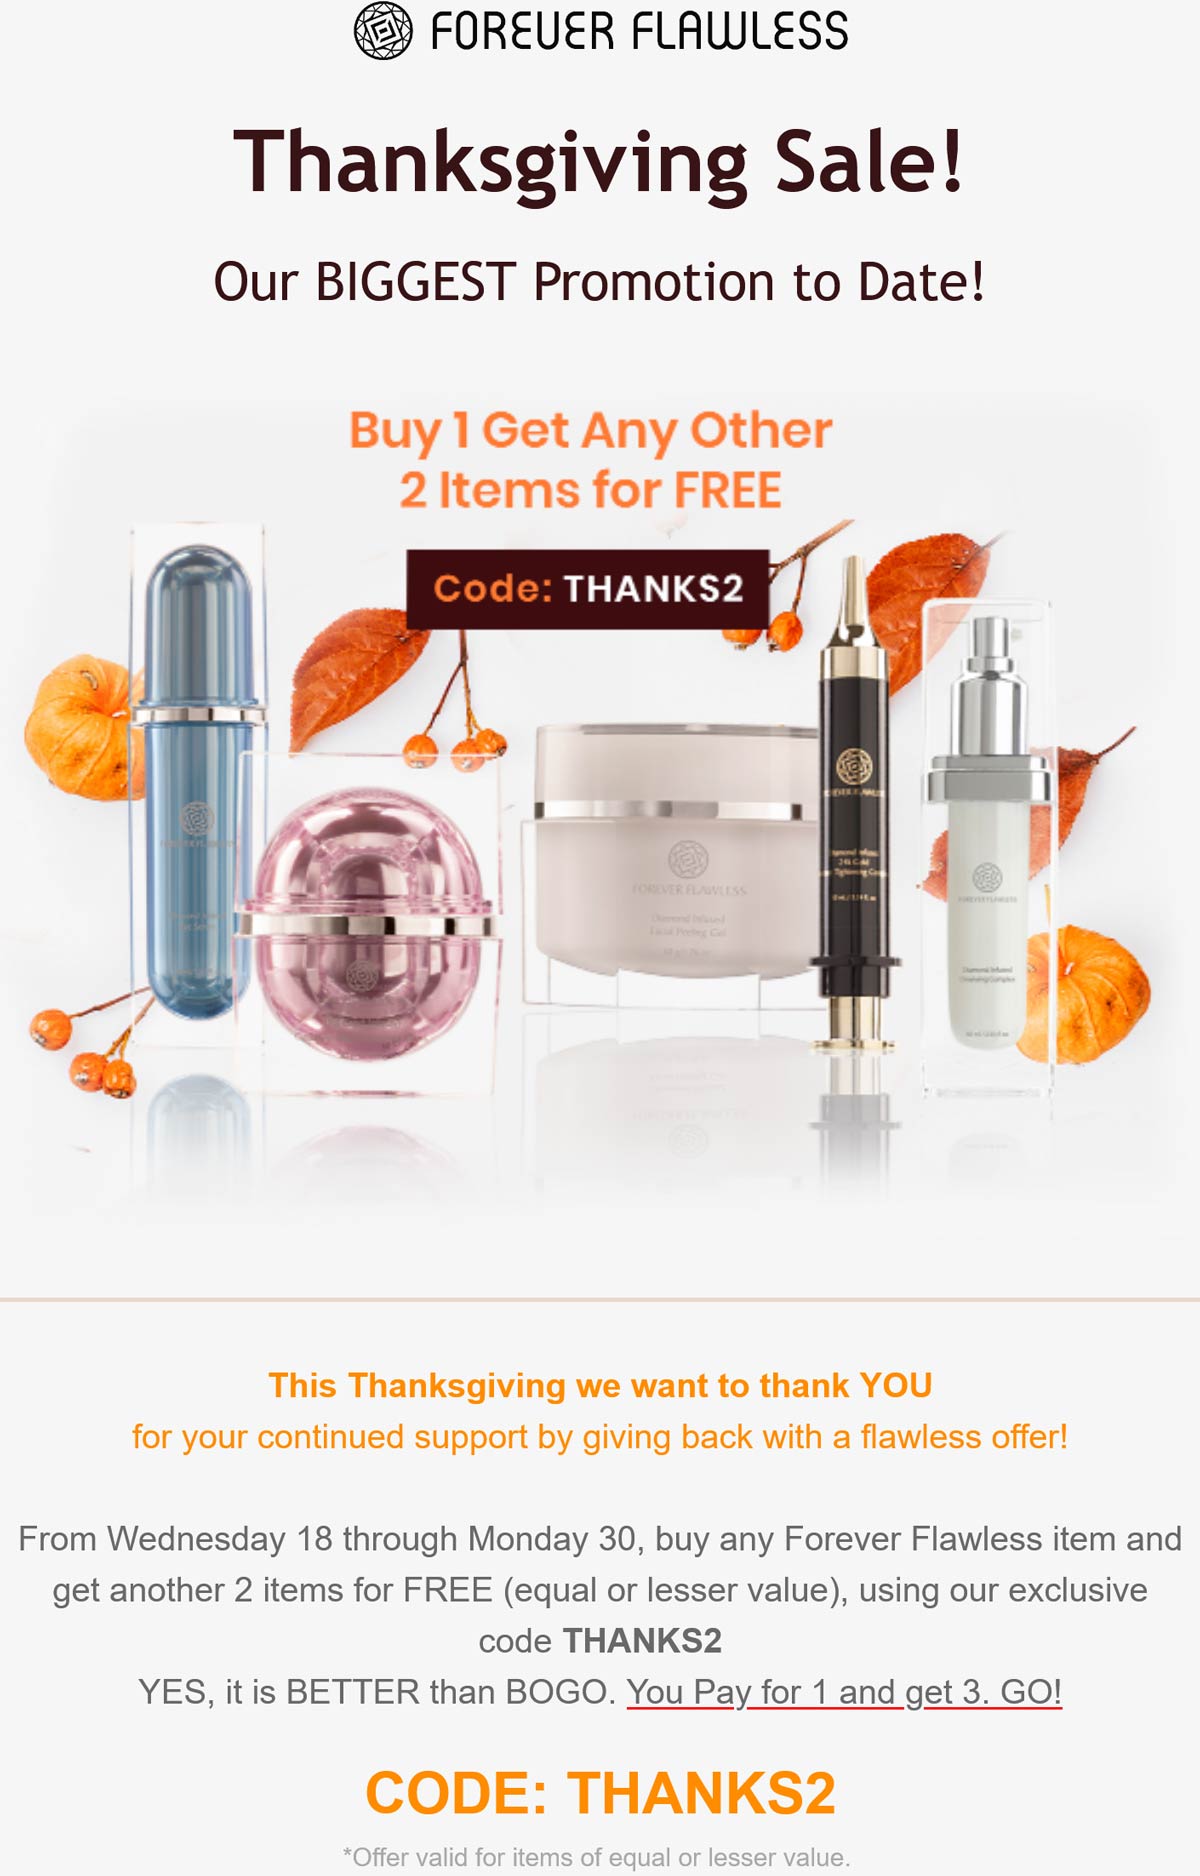 Forever Flawless stores Coupon  3rd item free at Forever Flawless via promo code THANKS2 #foreverflawless 